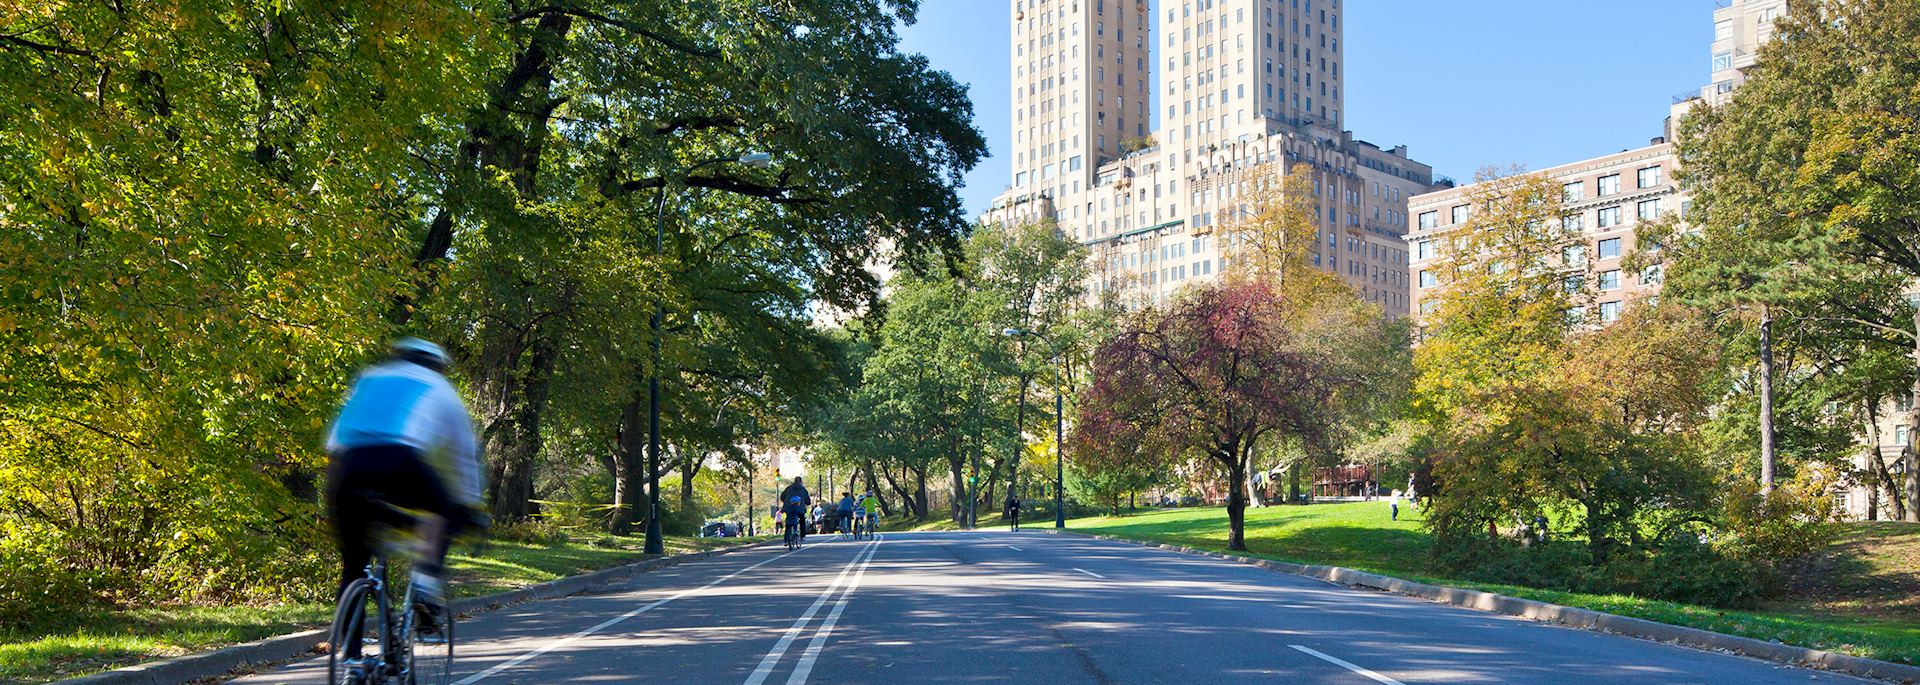 Cycling in Central Park, New York